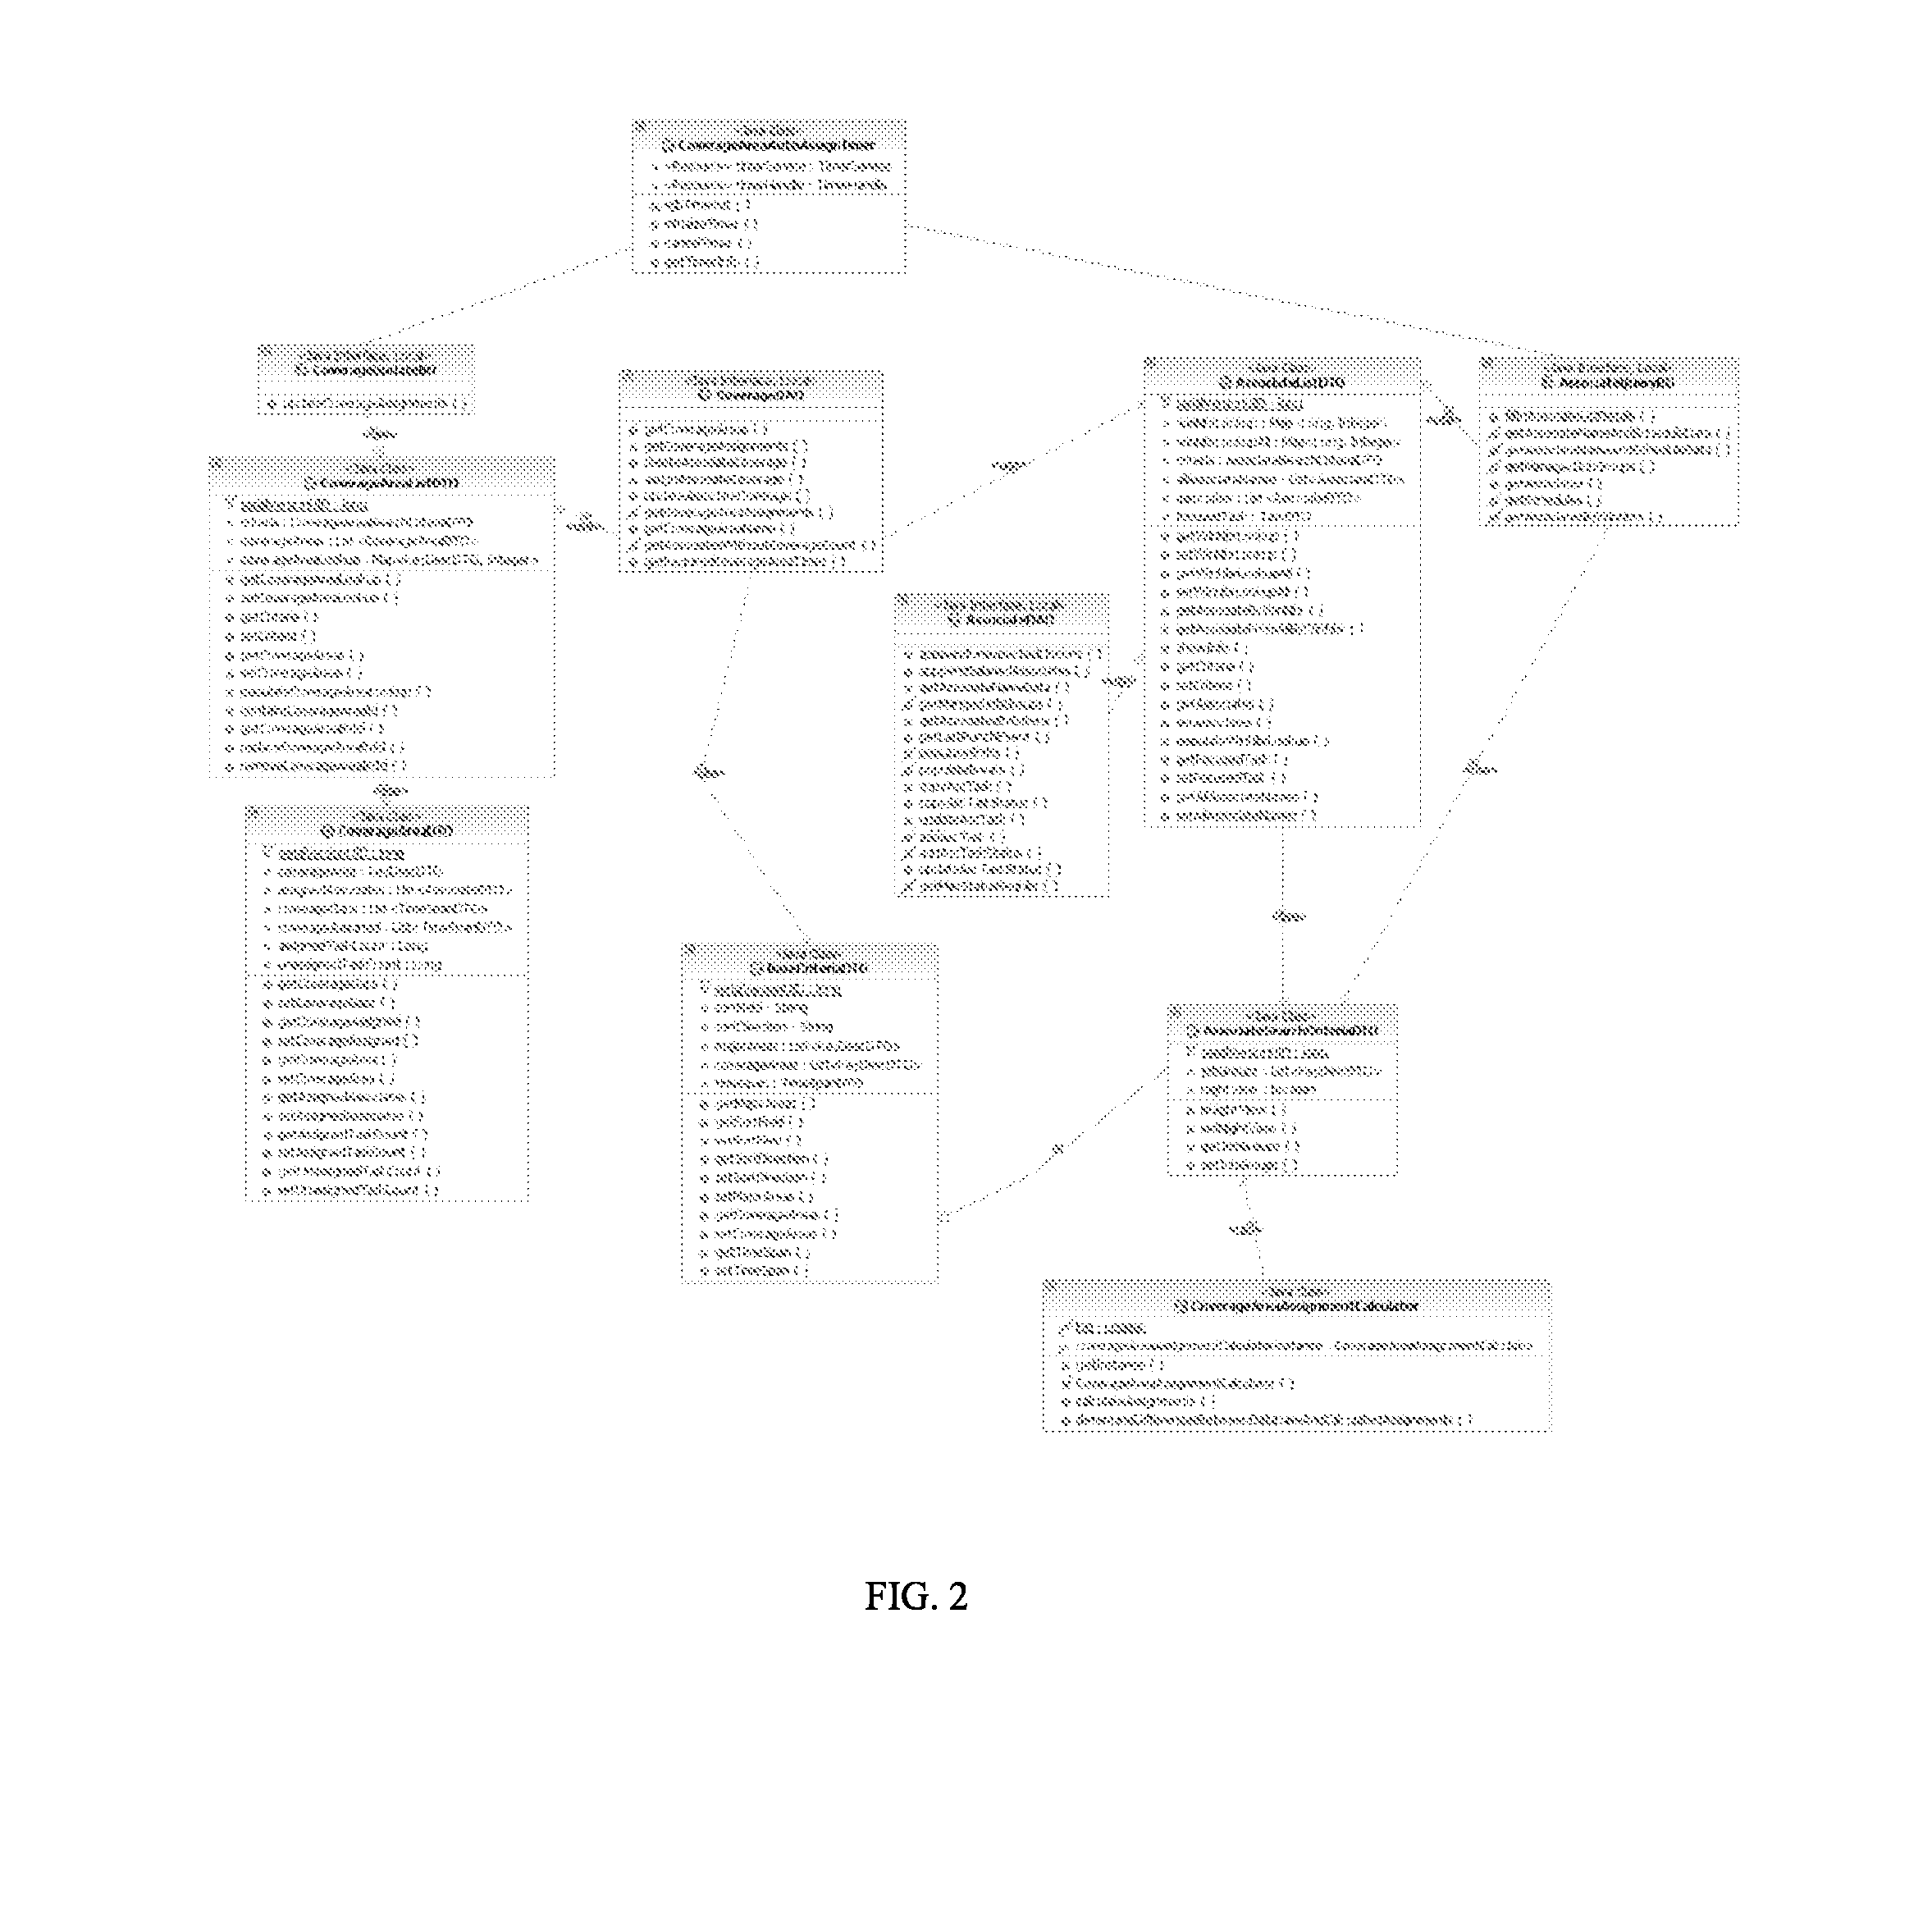 System and method for assigning employees to coverage and/or tasks based on schedule and preferences